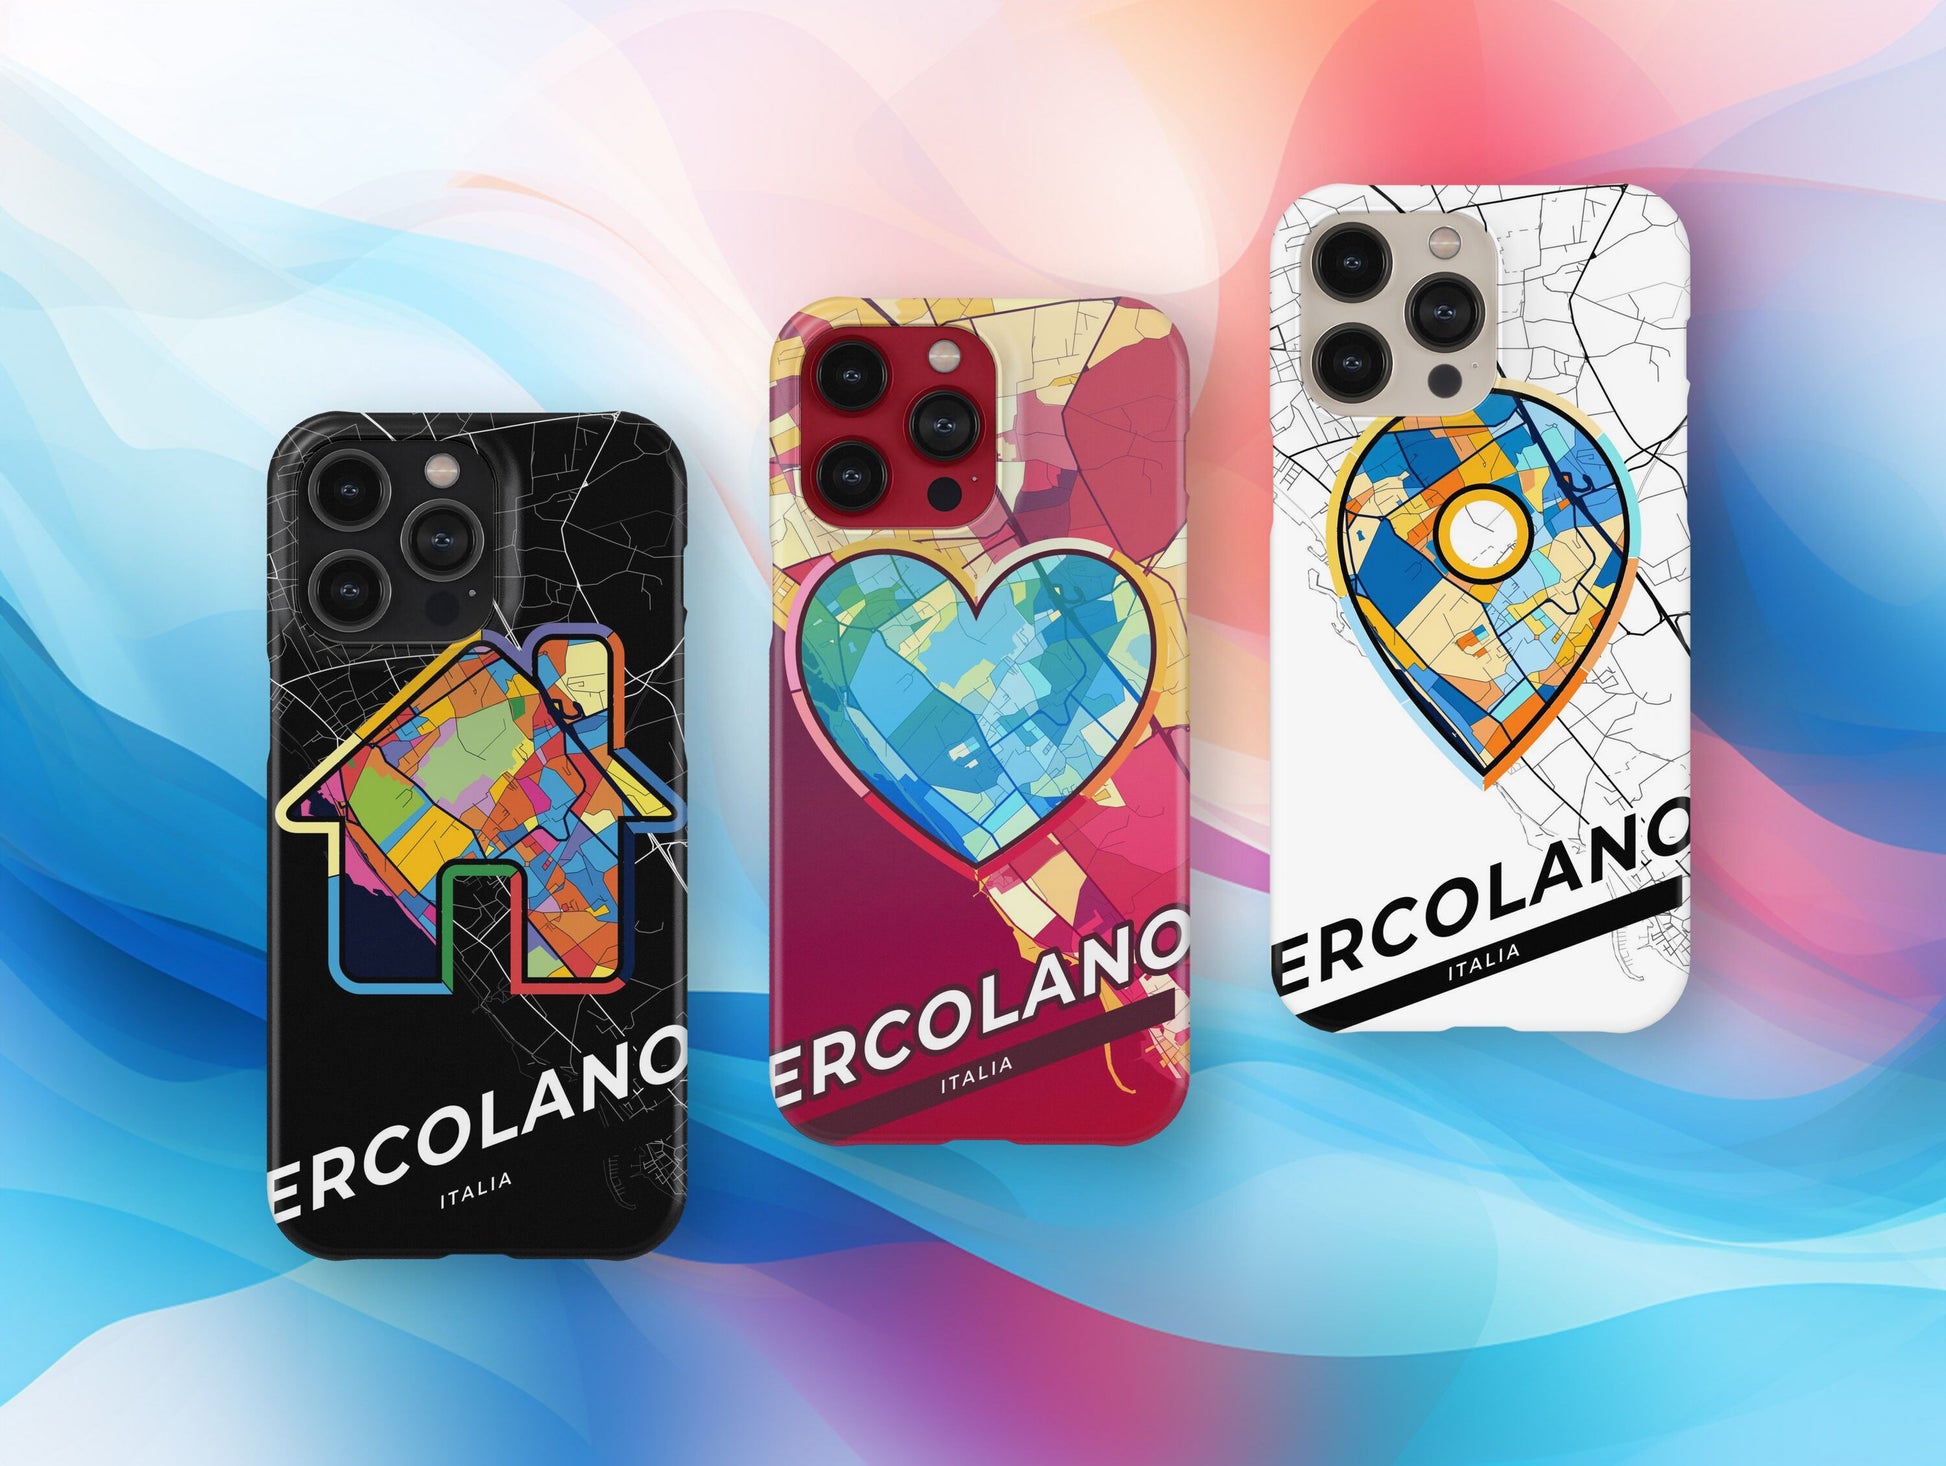 Ercolano Italy slim phone case with colorful icon. Birthday, wedding or housewarming gift. Couple match cases.